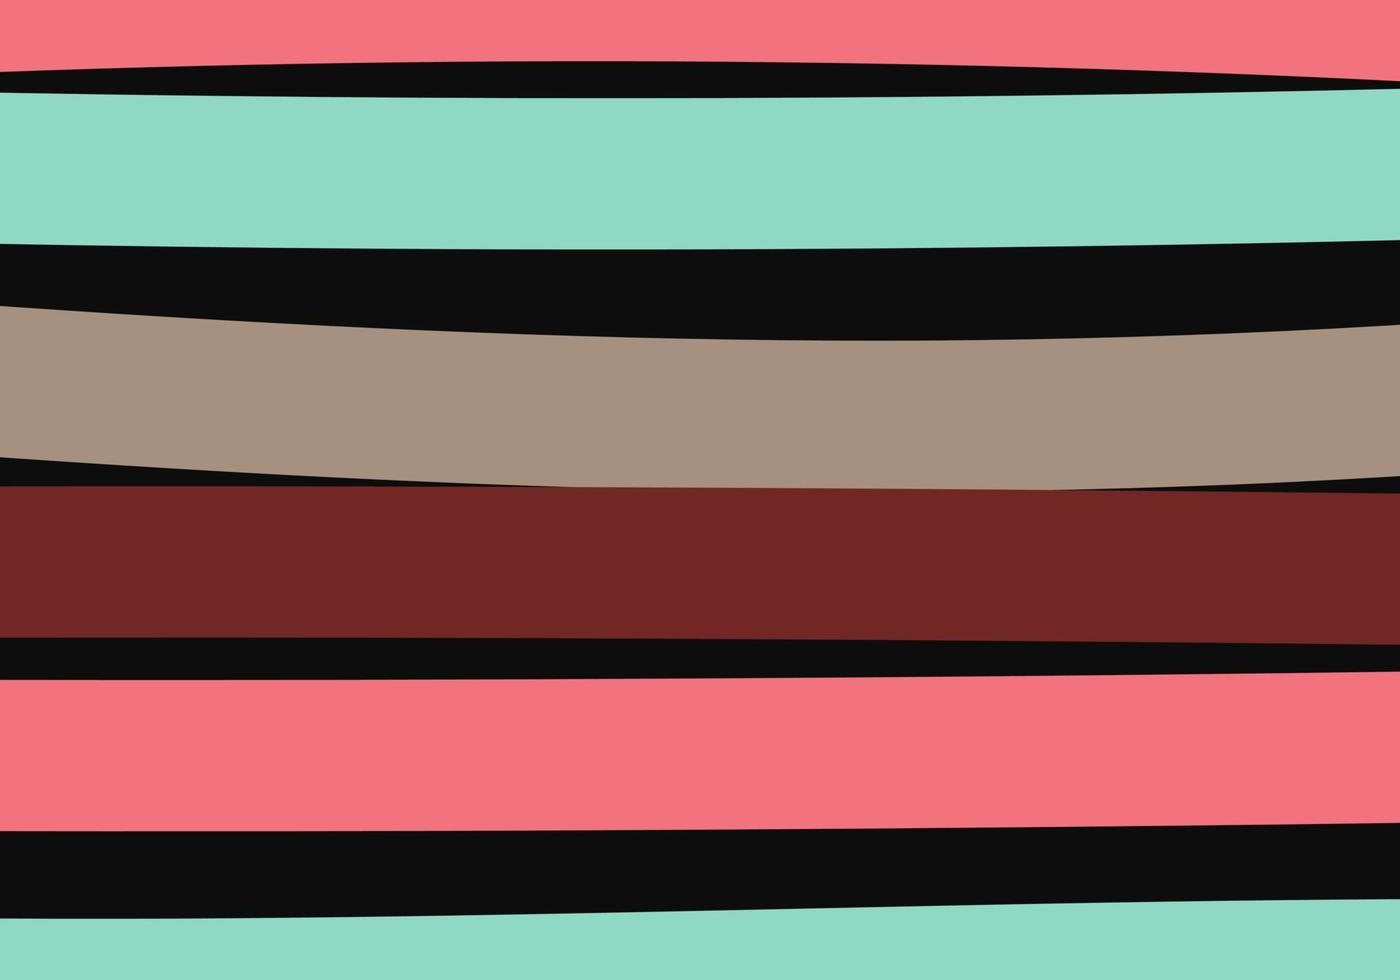 Abstract flat colorful stripes background. Vector illustration.